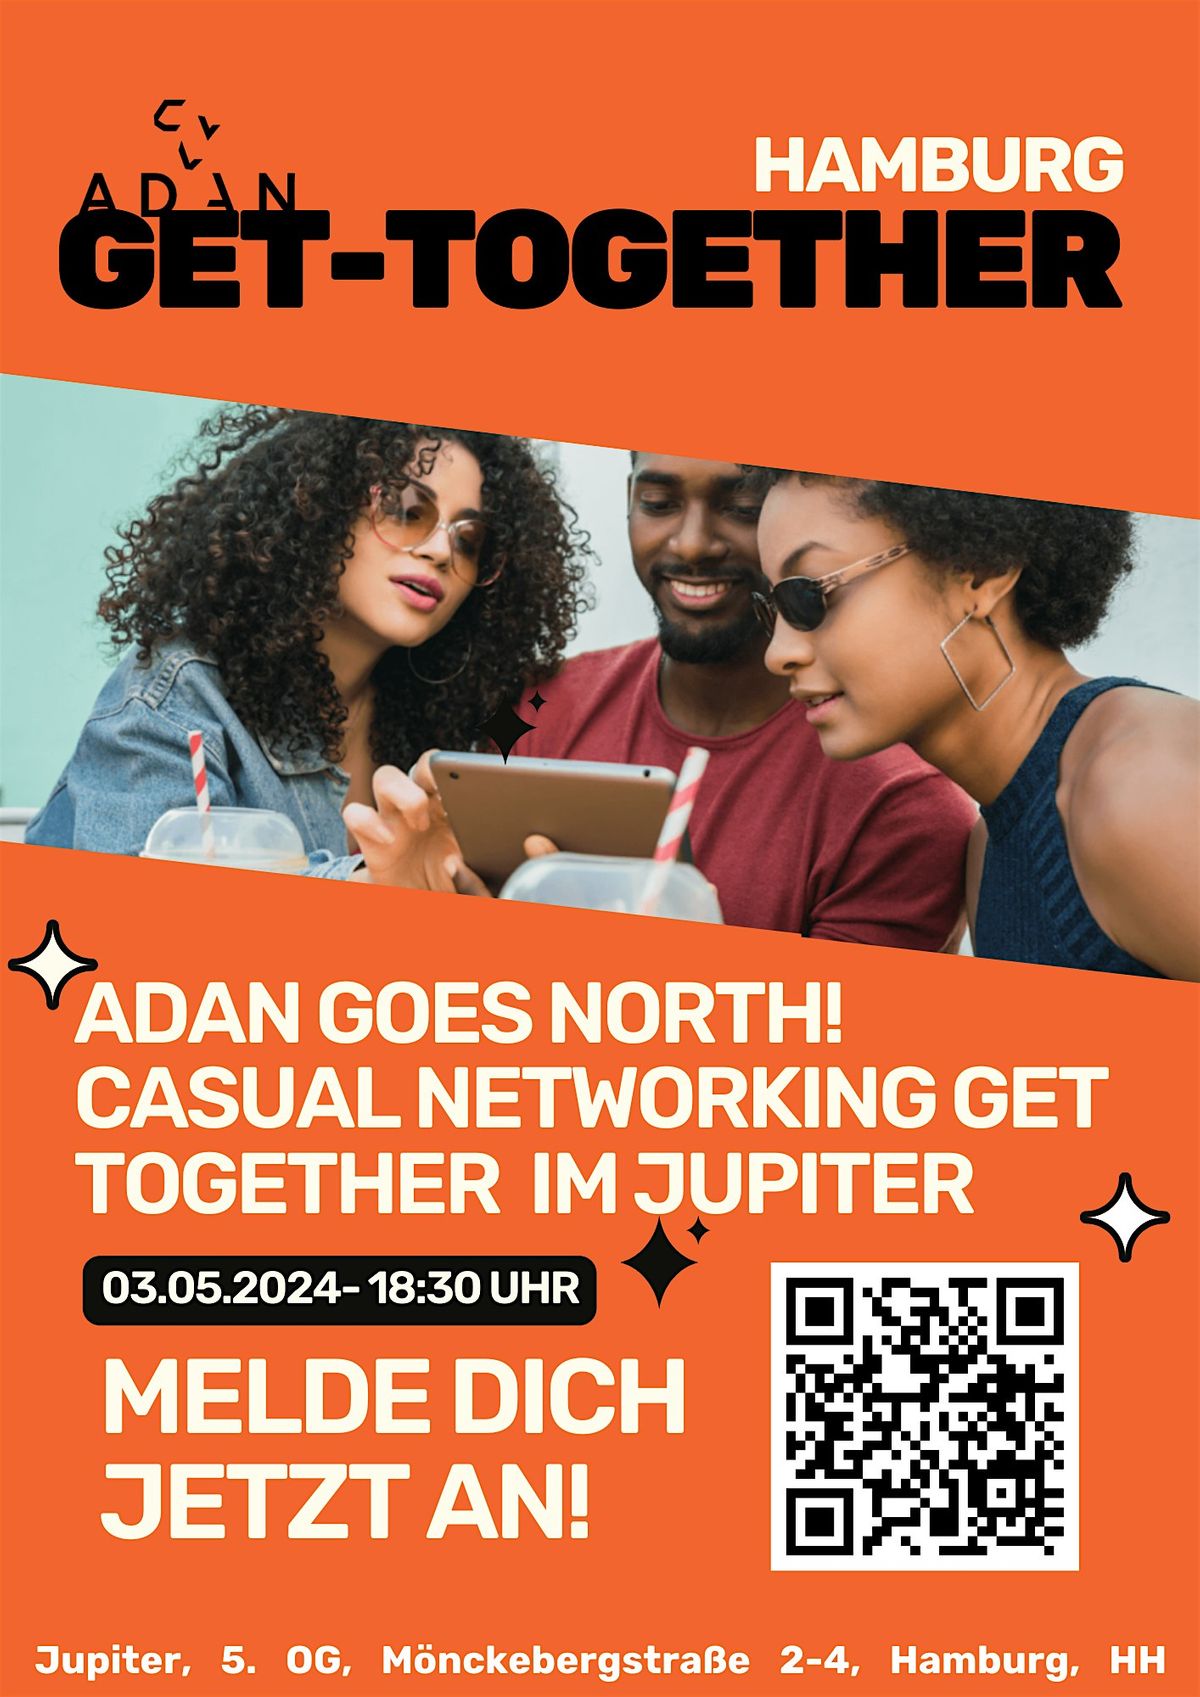 ADAN e.V. goes North! - Casual Networking Get Together